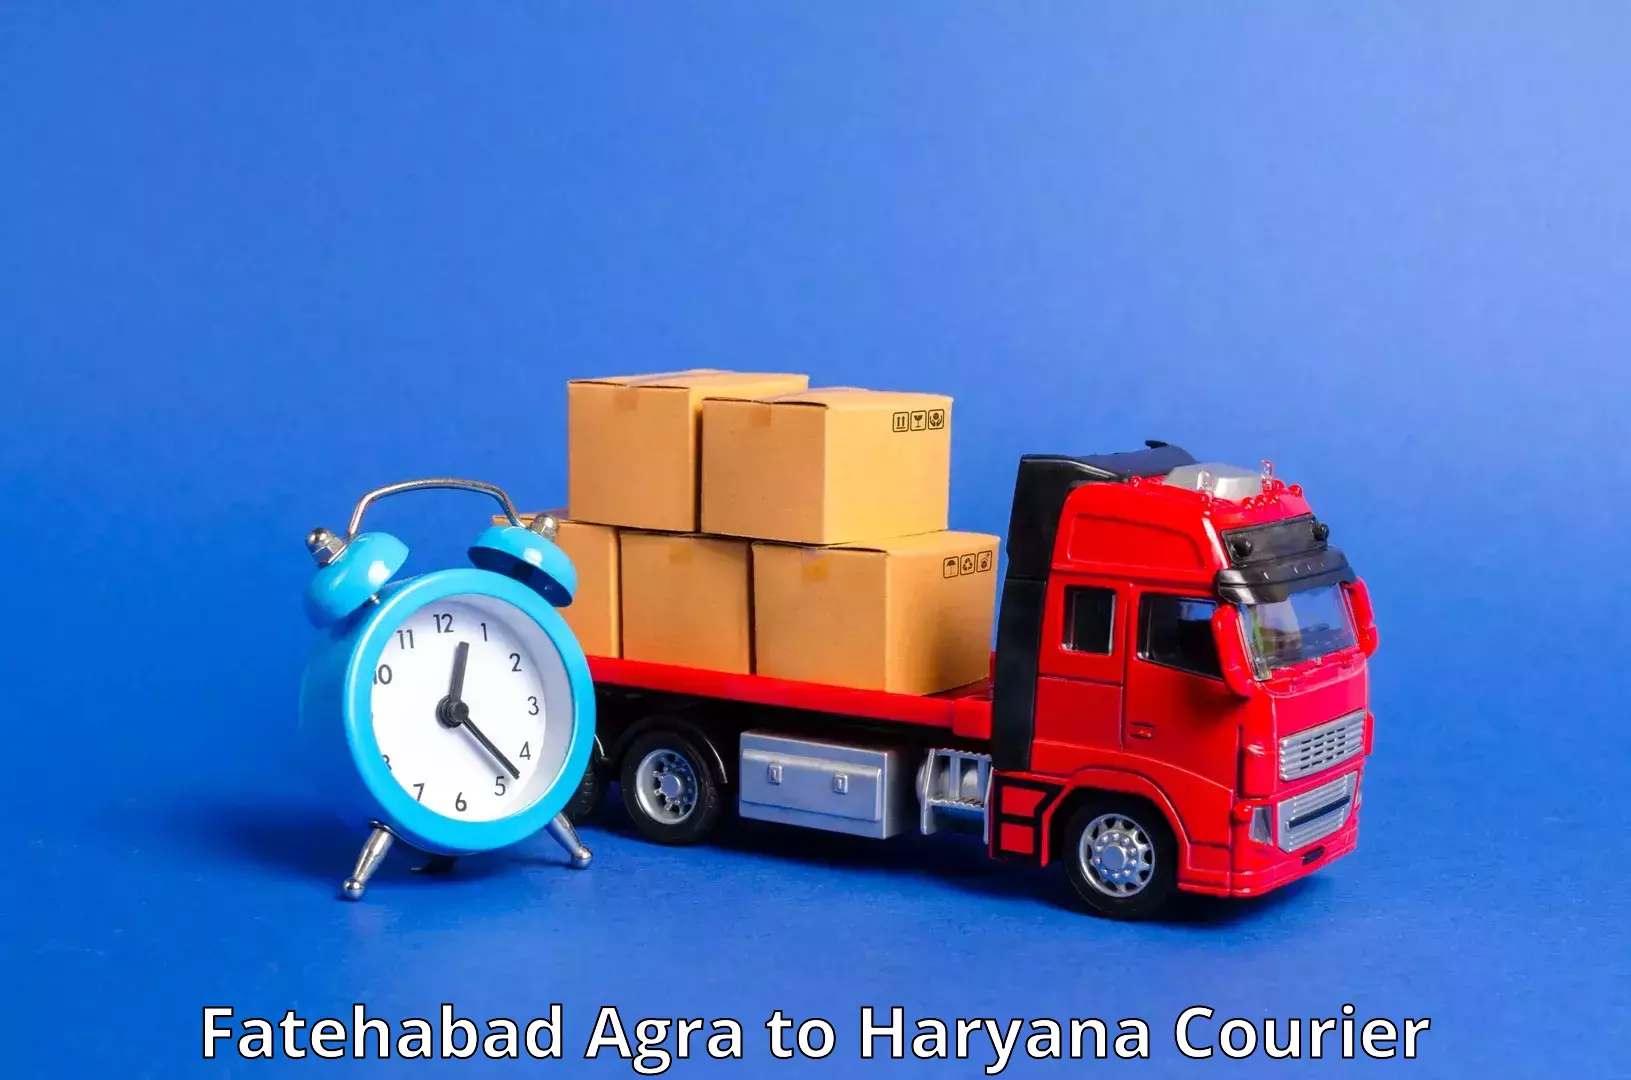 Flexible parcel services Fatehabad Agra to Haryana